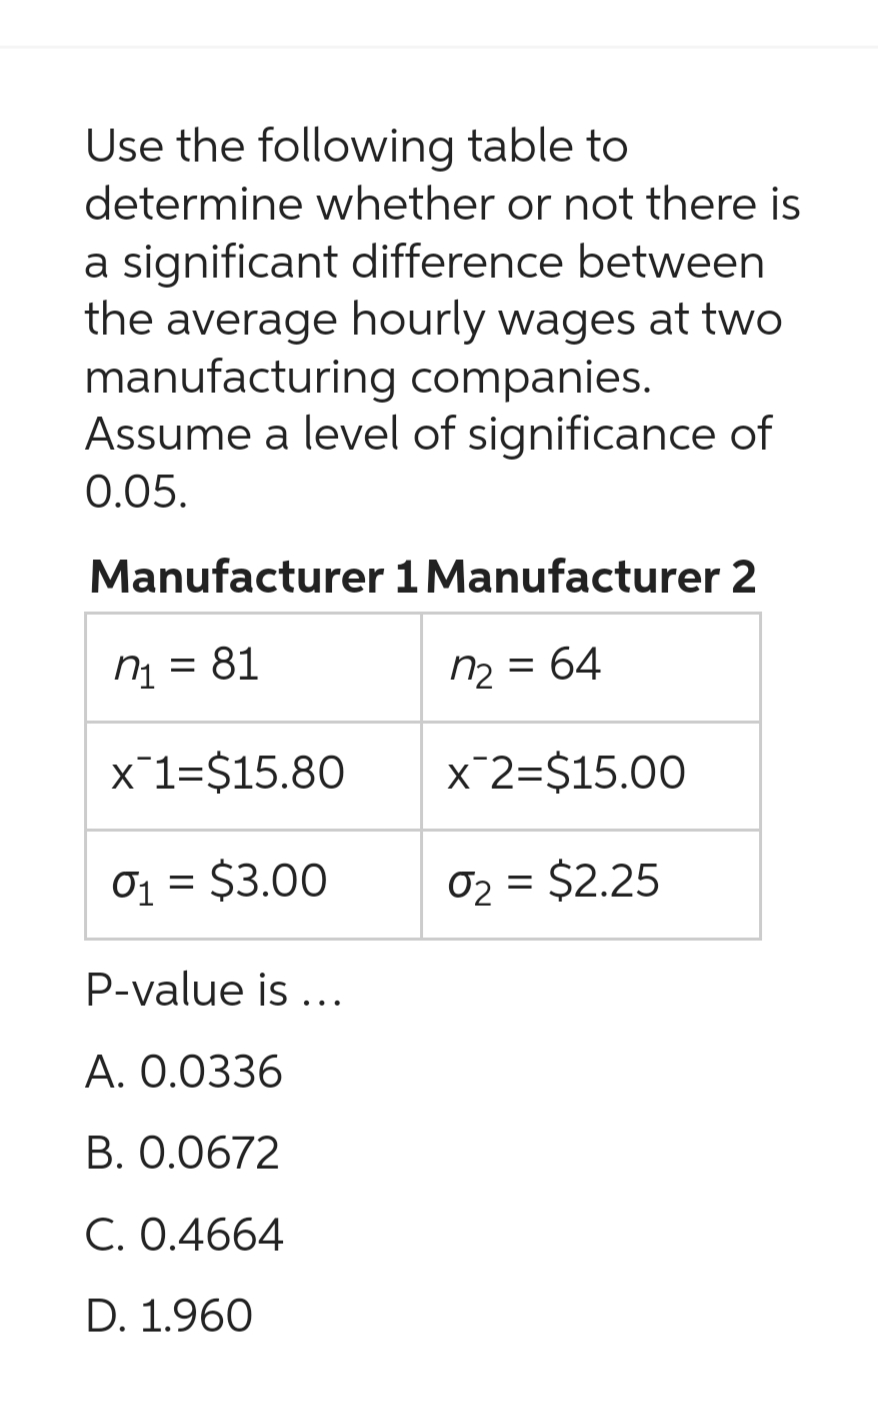 Use the following table to
determine whether or not there is
a significant difference between
the average hourly wages at two
manufacturing companies.
Assume a level of significance of
0.05.
Manufacturer 1 Manufacturer 2
n₁ = 81
n₂ = 64
x 1-$15.80
x 2=$15.00
0₂ = $2.25
0₁ = $3.00
P-value is ...
A. 0.0336
B. 0.0672
C. 0.4664
D. 1.960